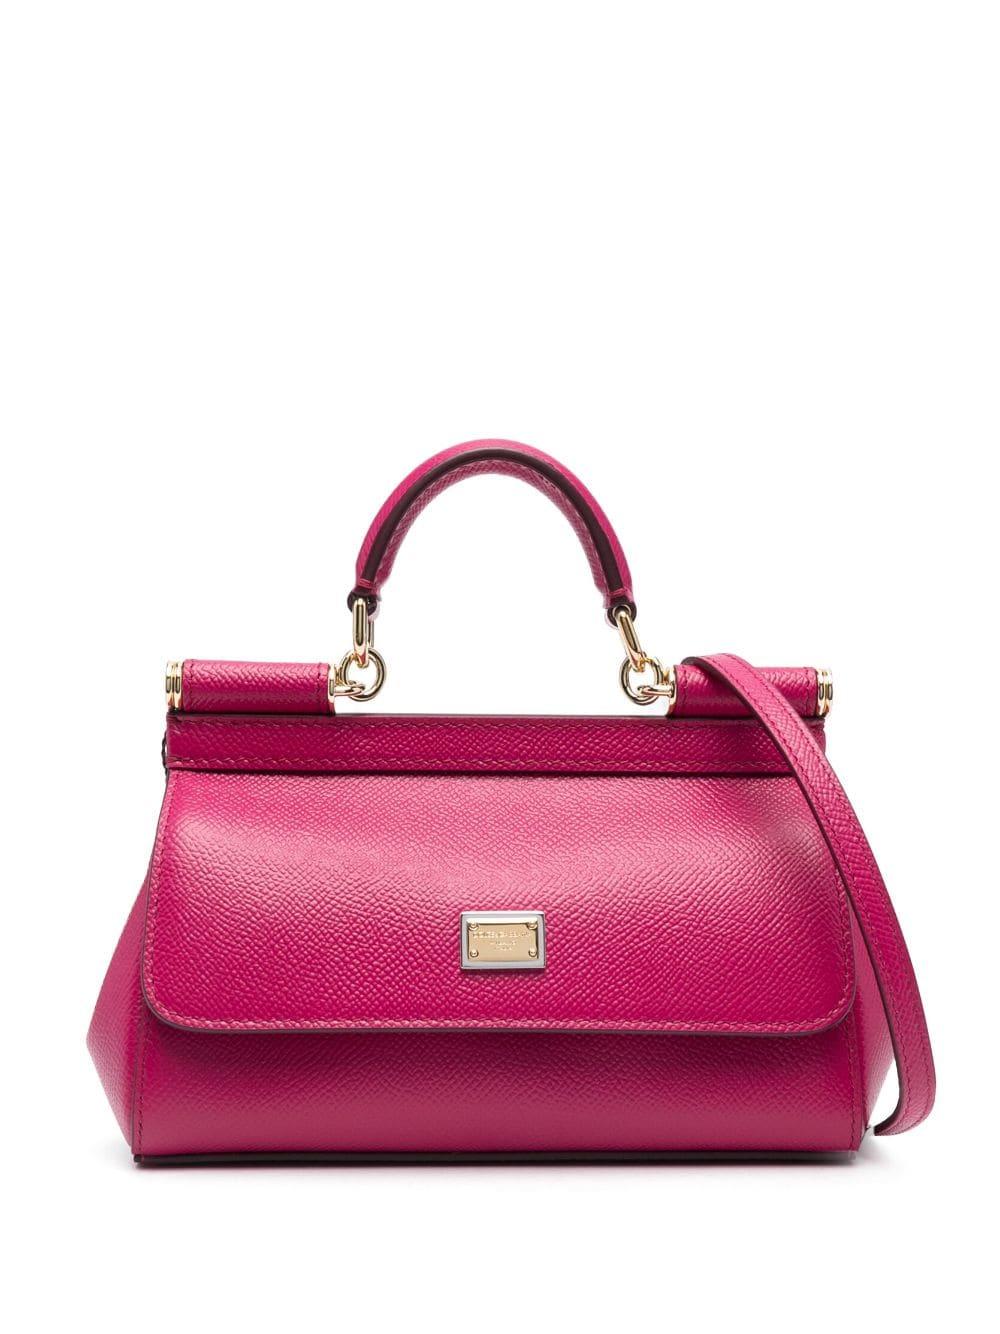 DOLCE & GABBANA SMALL SICILY BAG IN DAUPHINE LEATHER